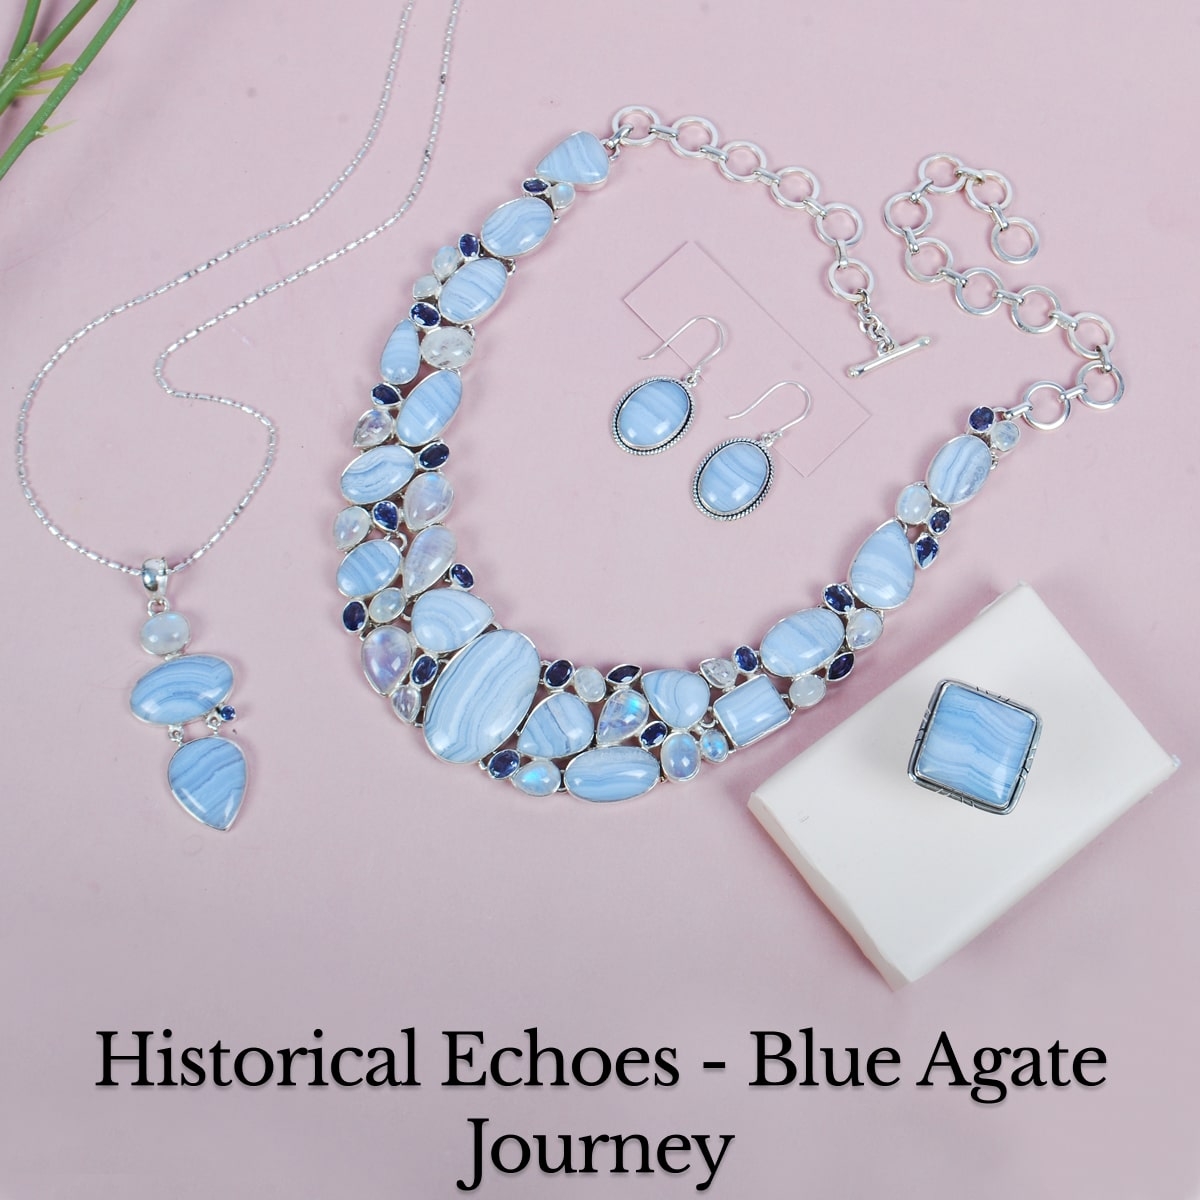 Blue agate history